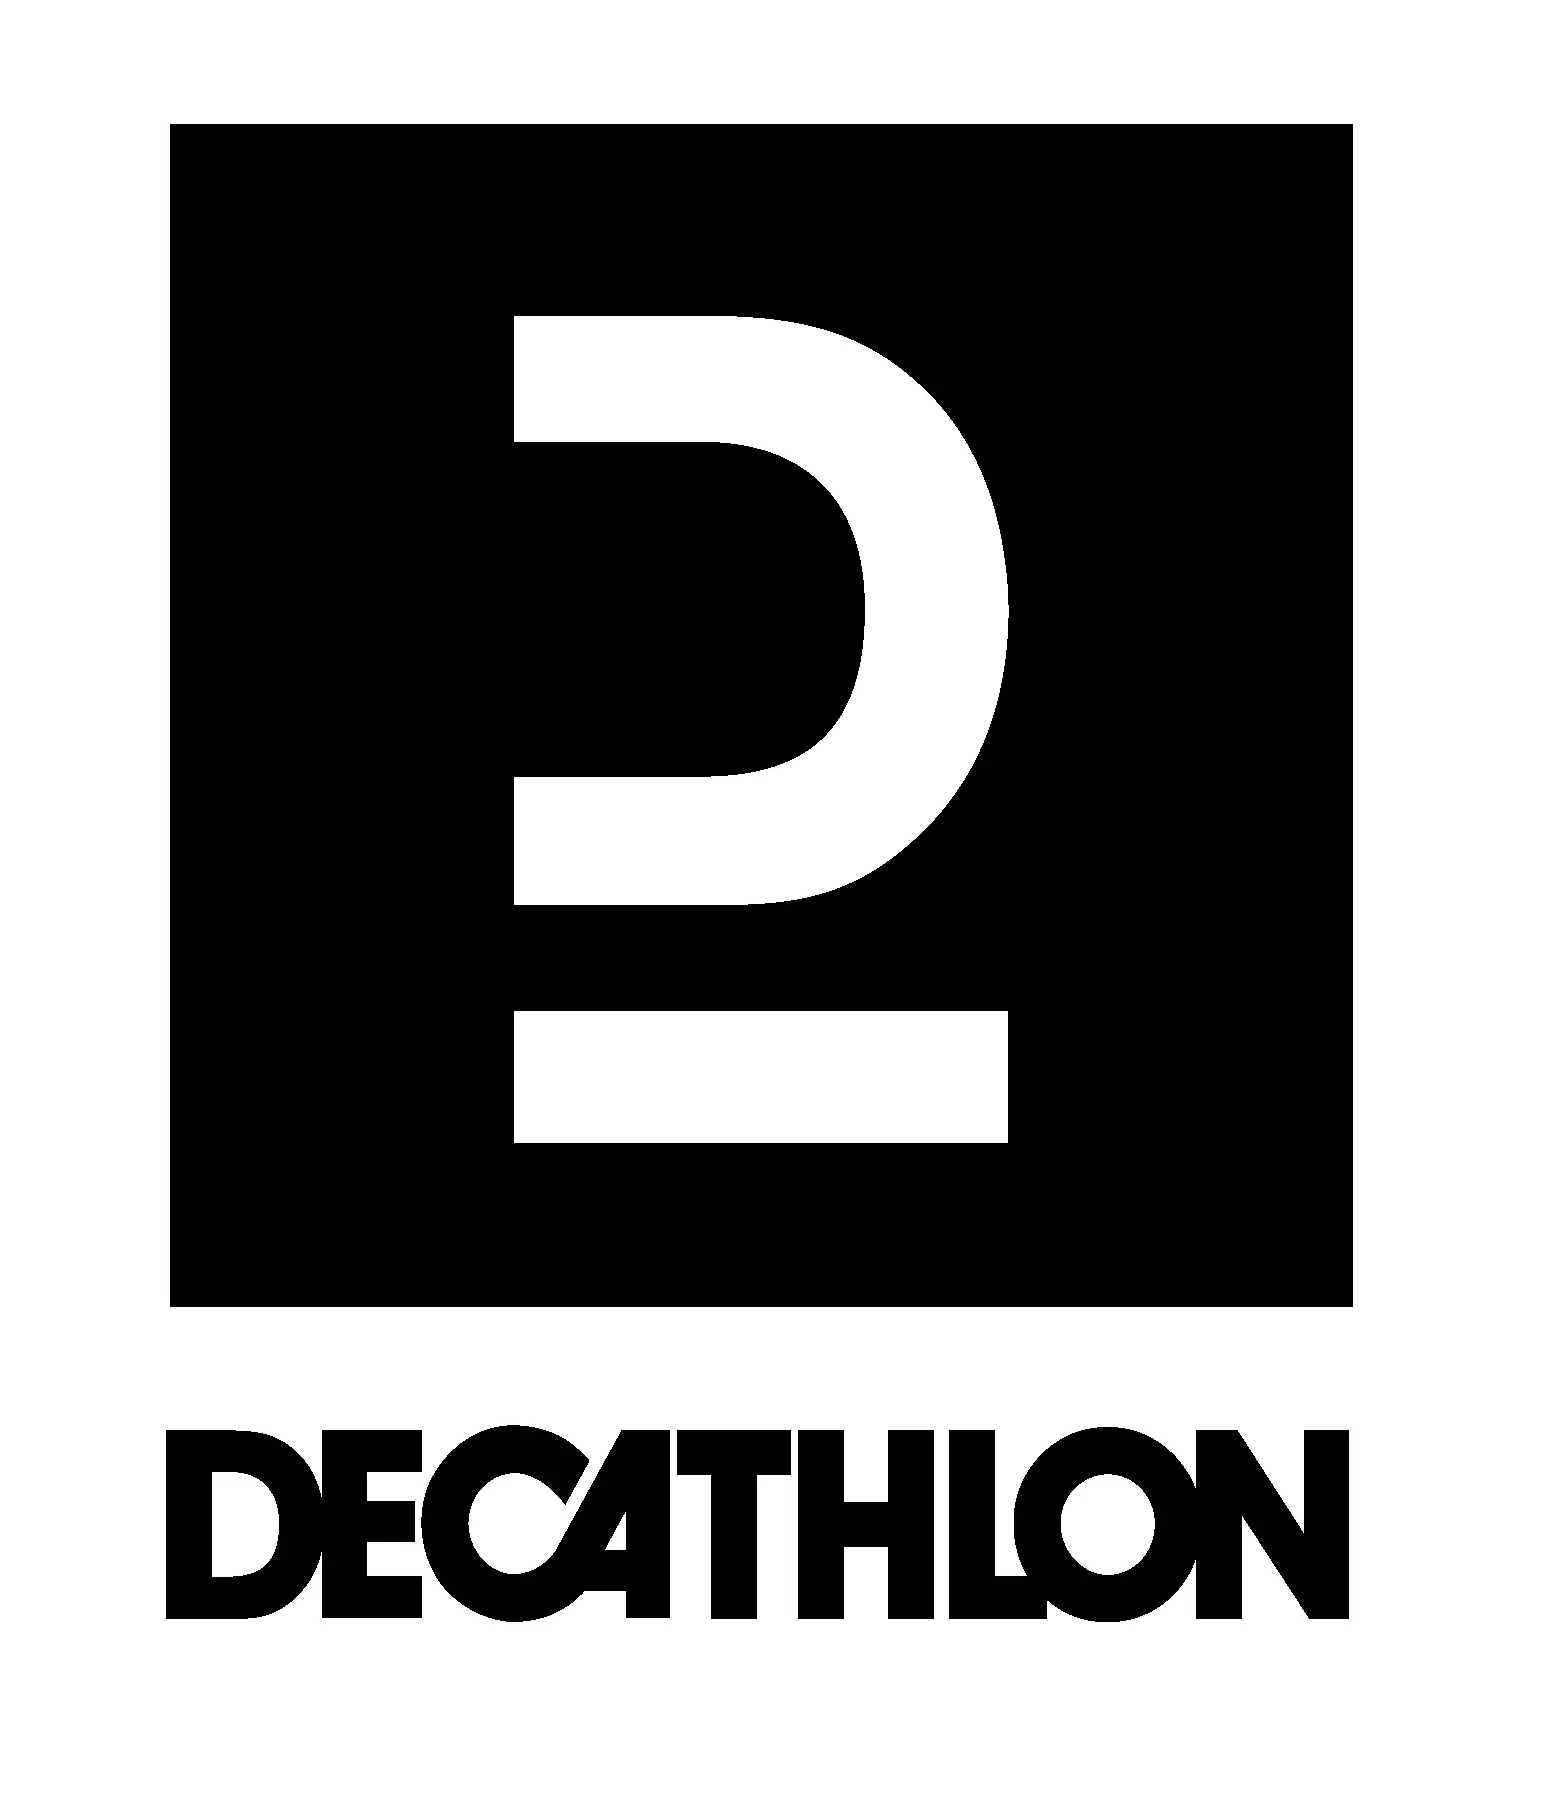 Decathlon gets a new logo—its first in 48 years